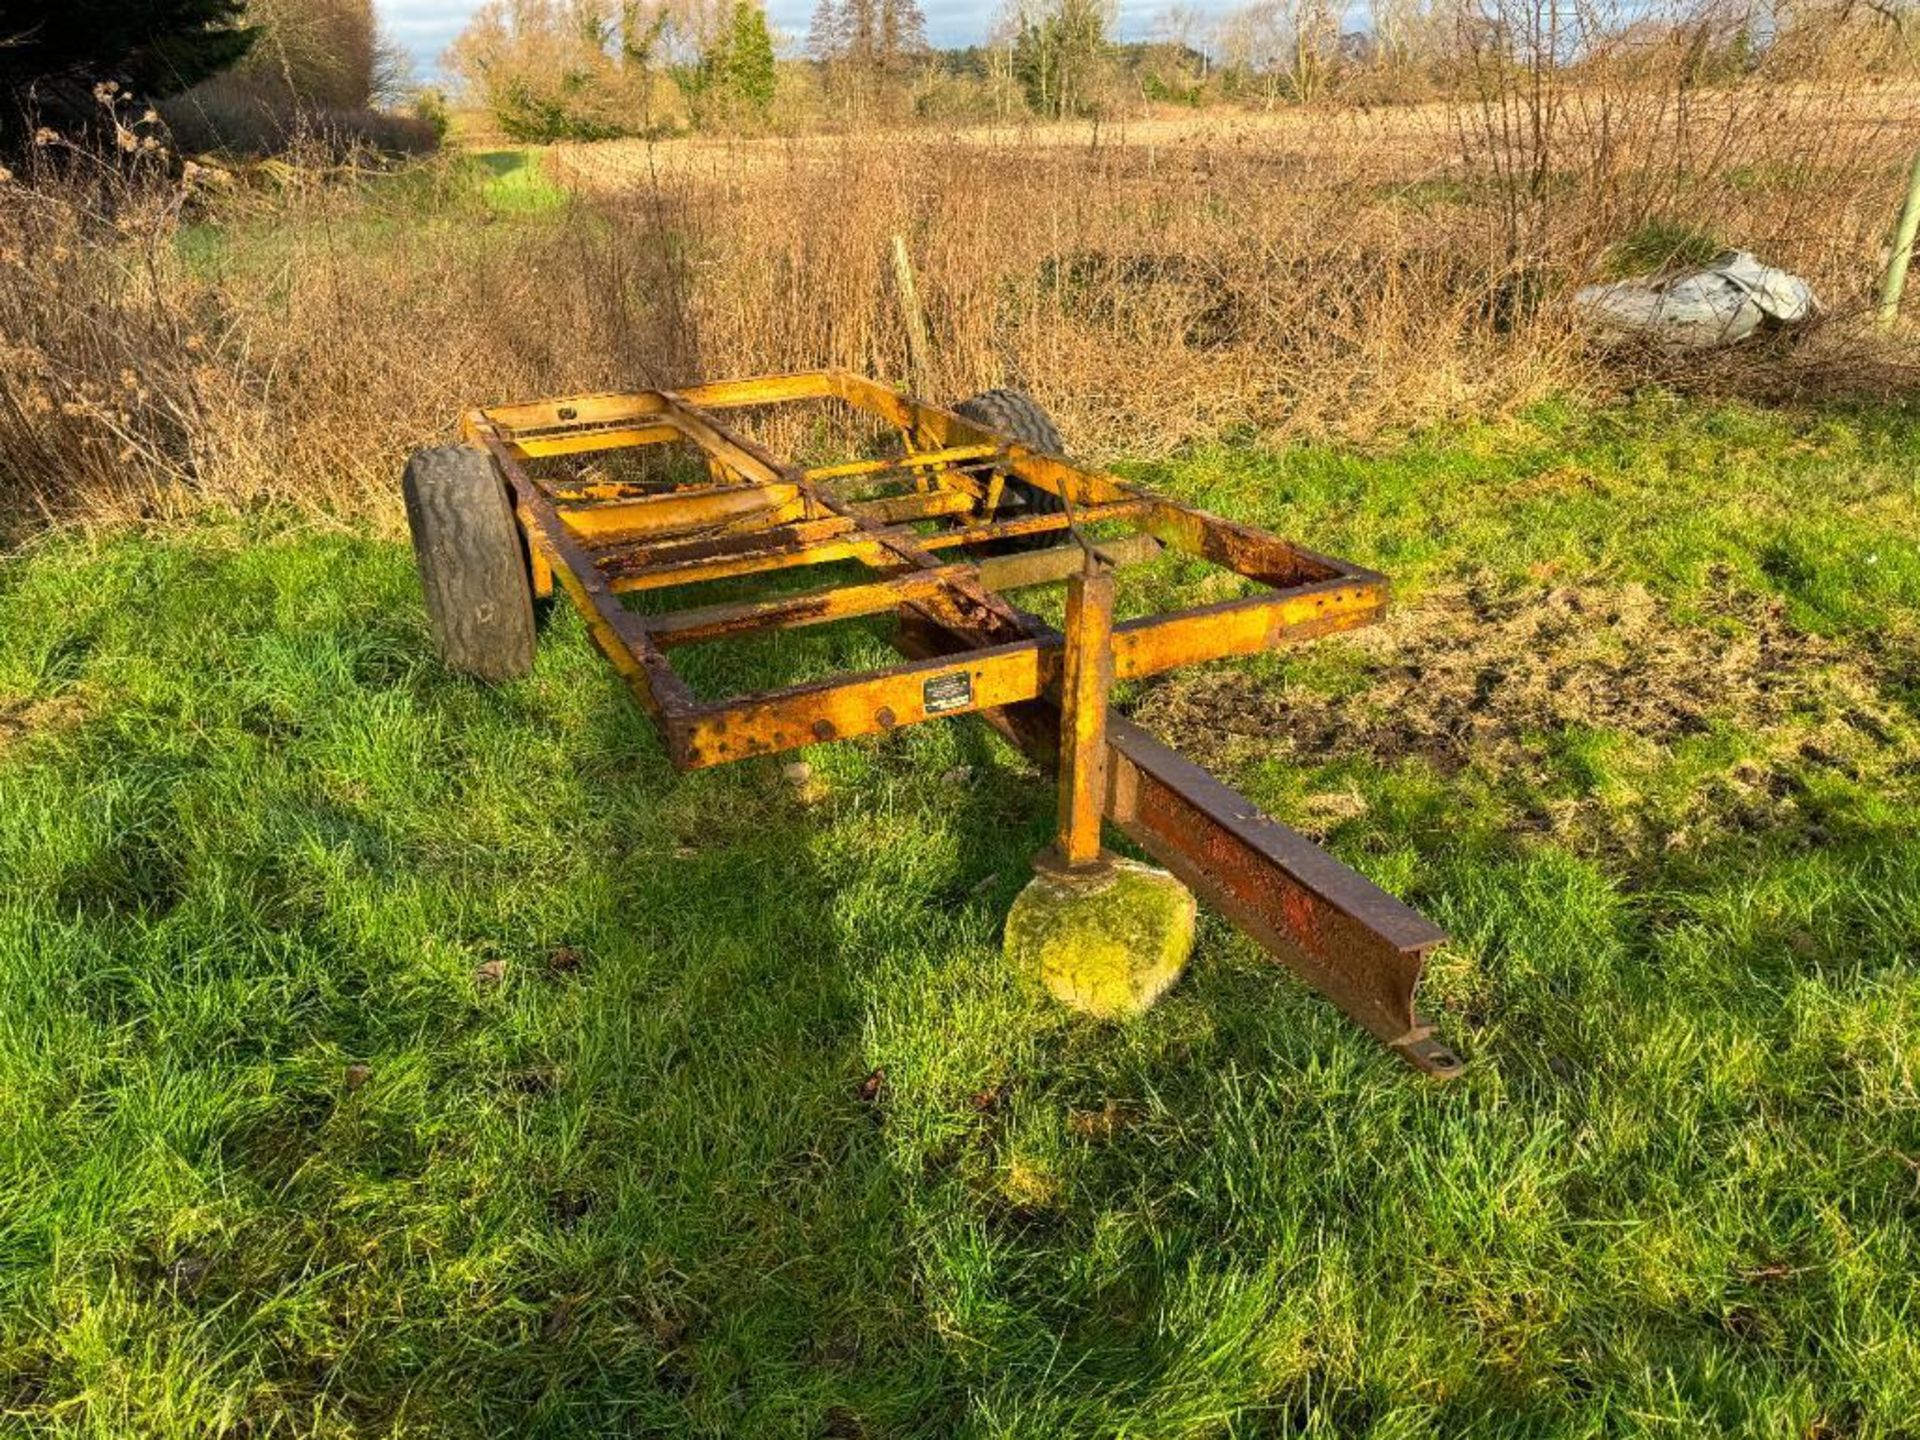 Farm-made Root Engineering flat bed trailer frame on 10.5/85-15.3 wheels and tyres - Image 2 of 3